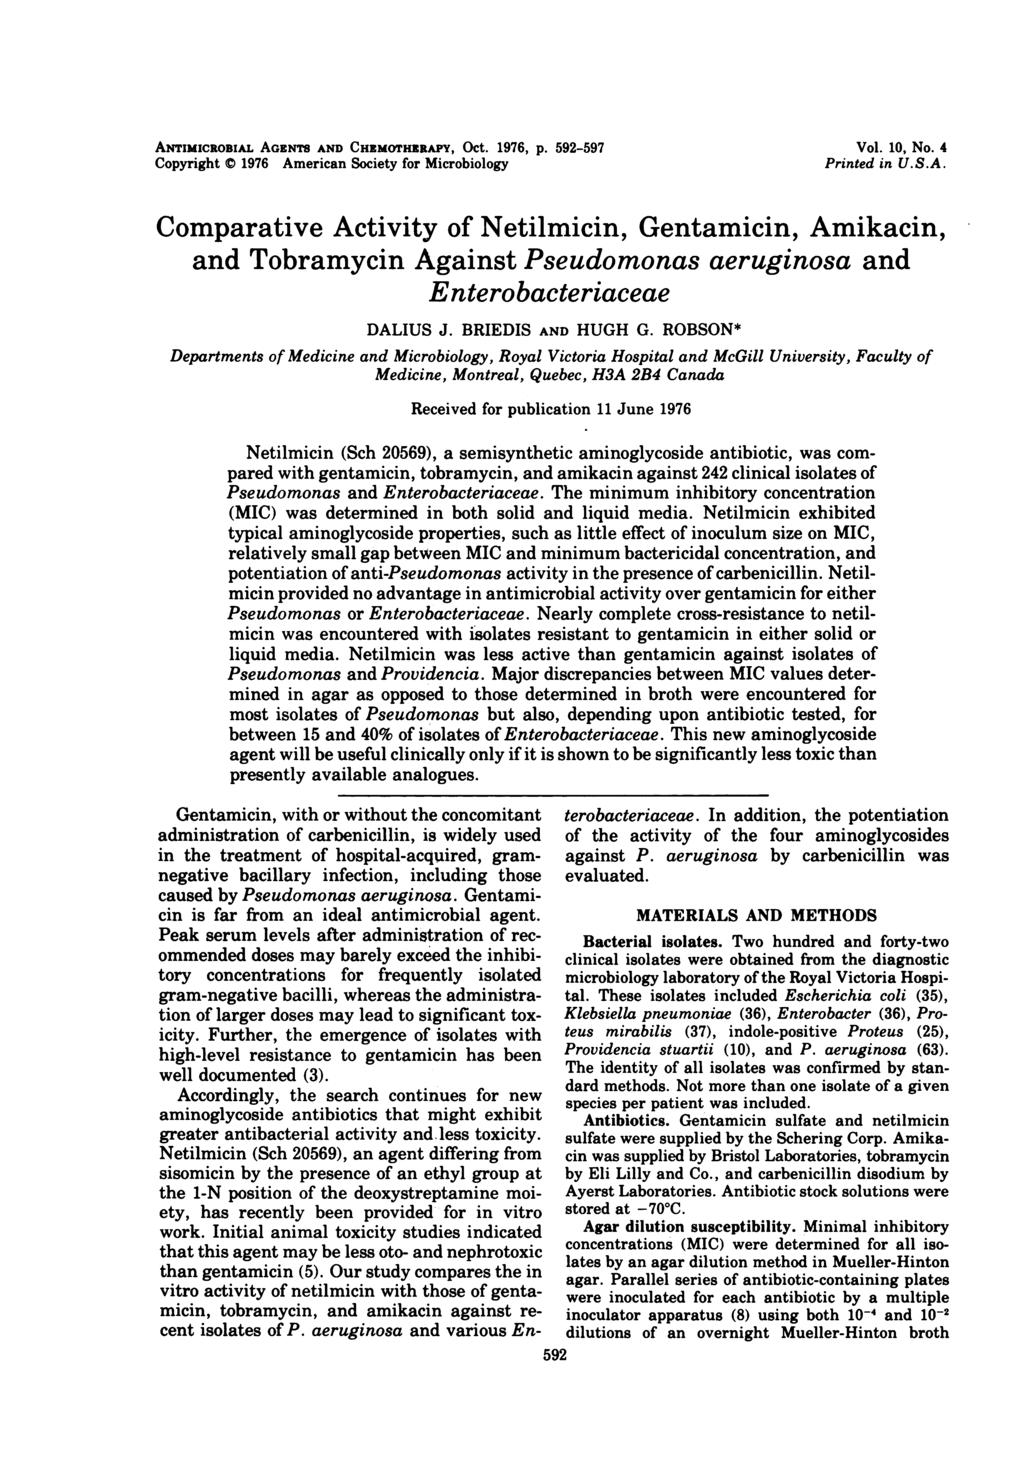 ANTIMICROBIAL AGzNTS AND CHEMOTHERAPY, Oct. 1976, P. 592-597 Copyright 1976 American Society for Microbiology Vol. 1, No. 4 Printed in U.S.A. Comparative Activity of Netilmicin, Gentamicin, Amikacin, and Tobramycin Against Pseudomonas aeruginosa and Enterobacteriaceae DALIUS J.